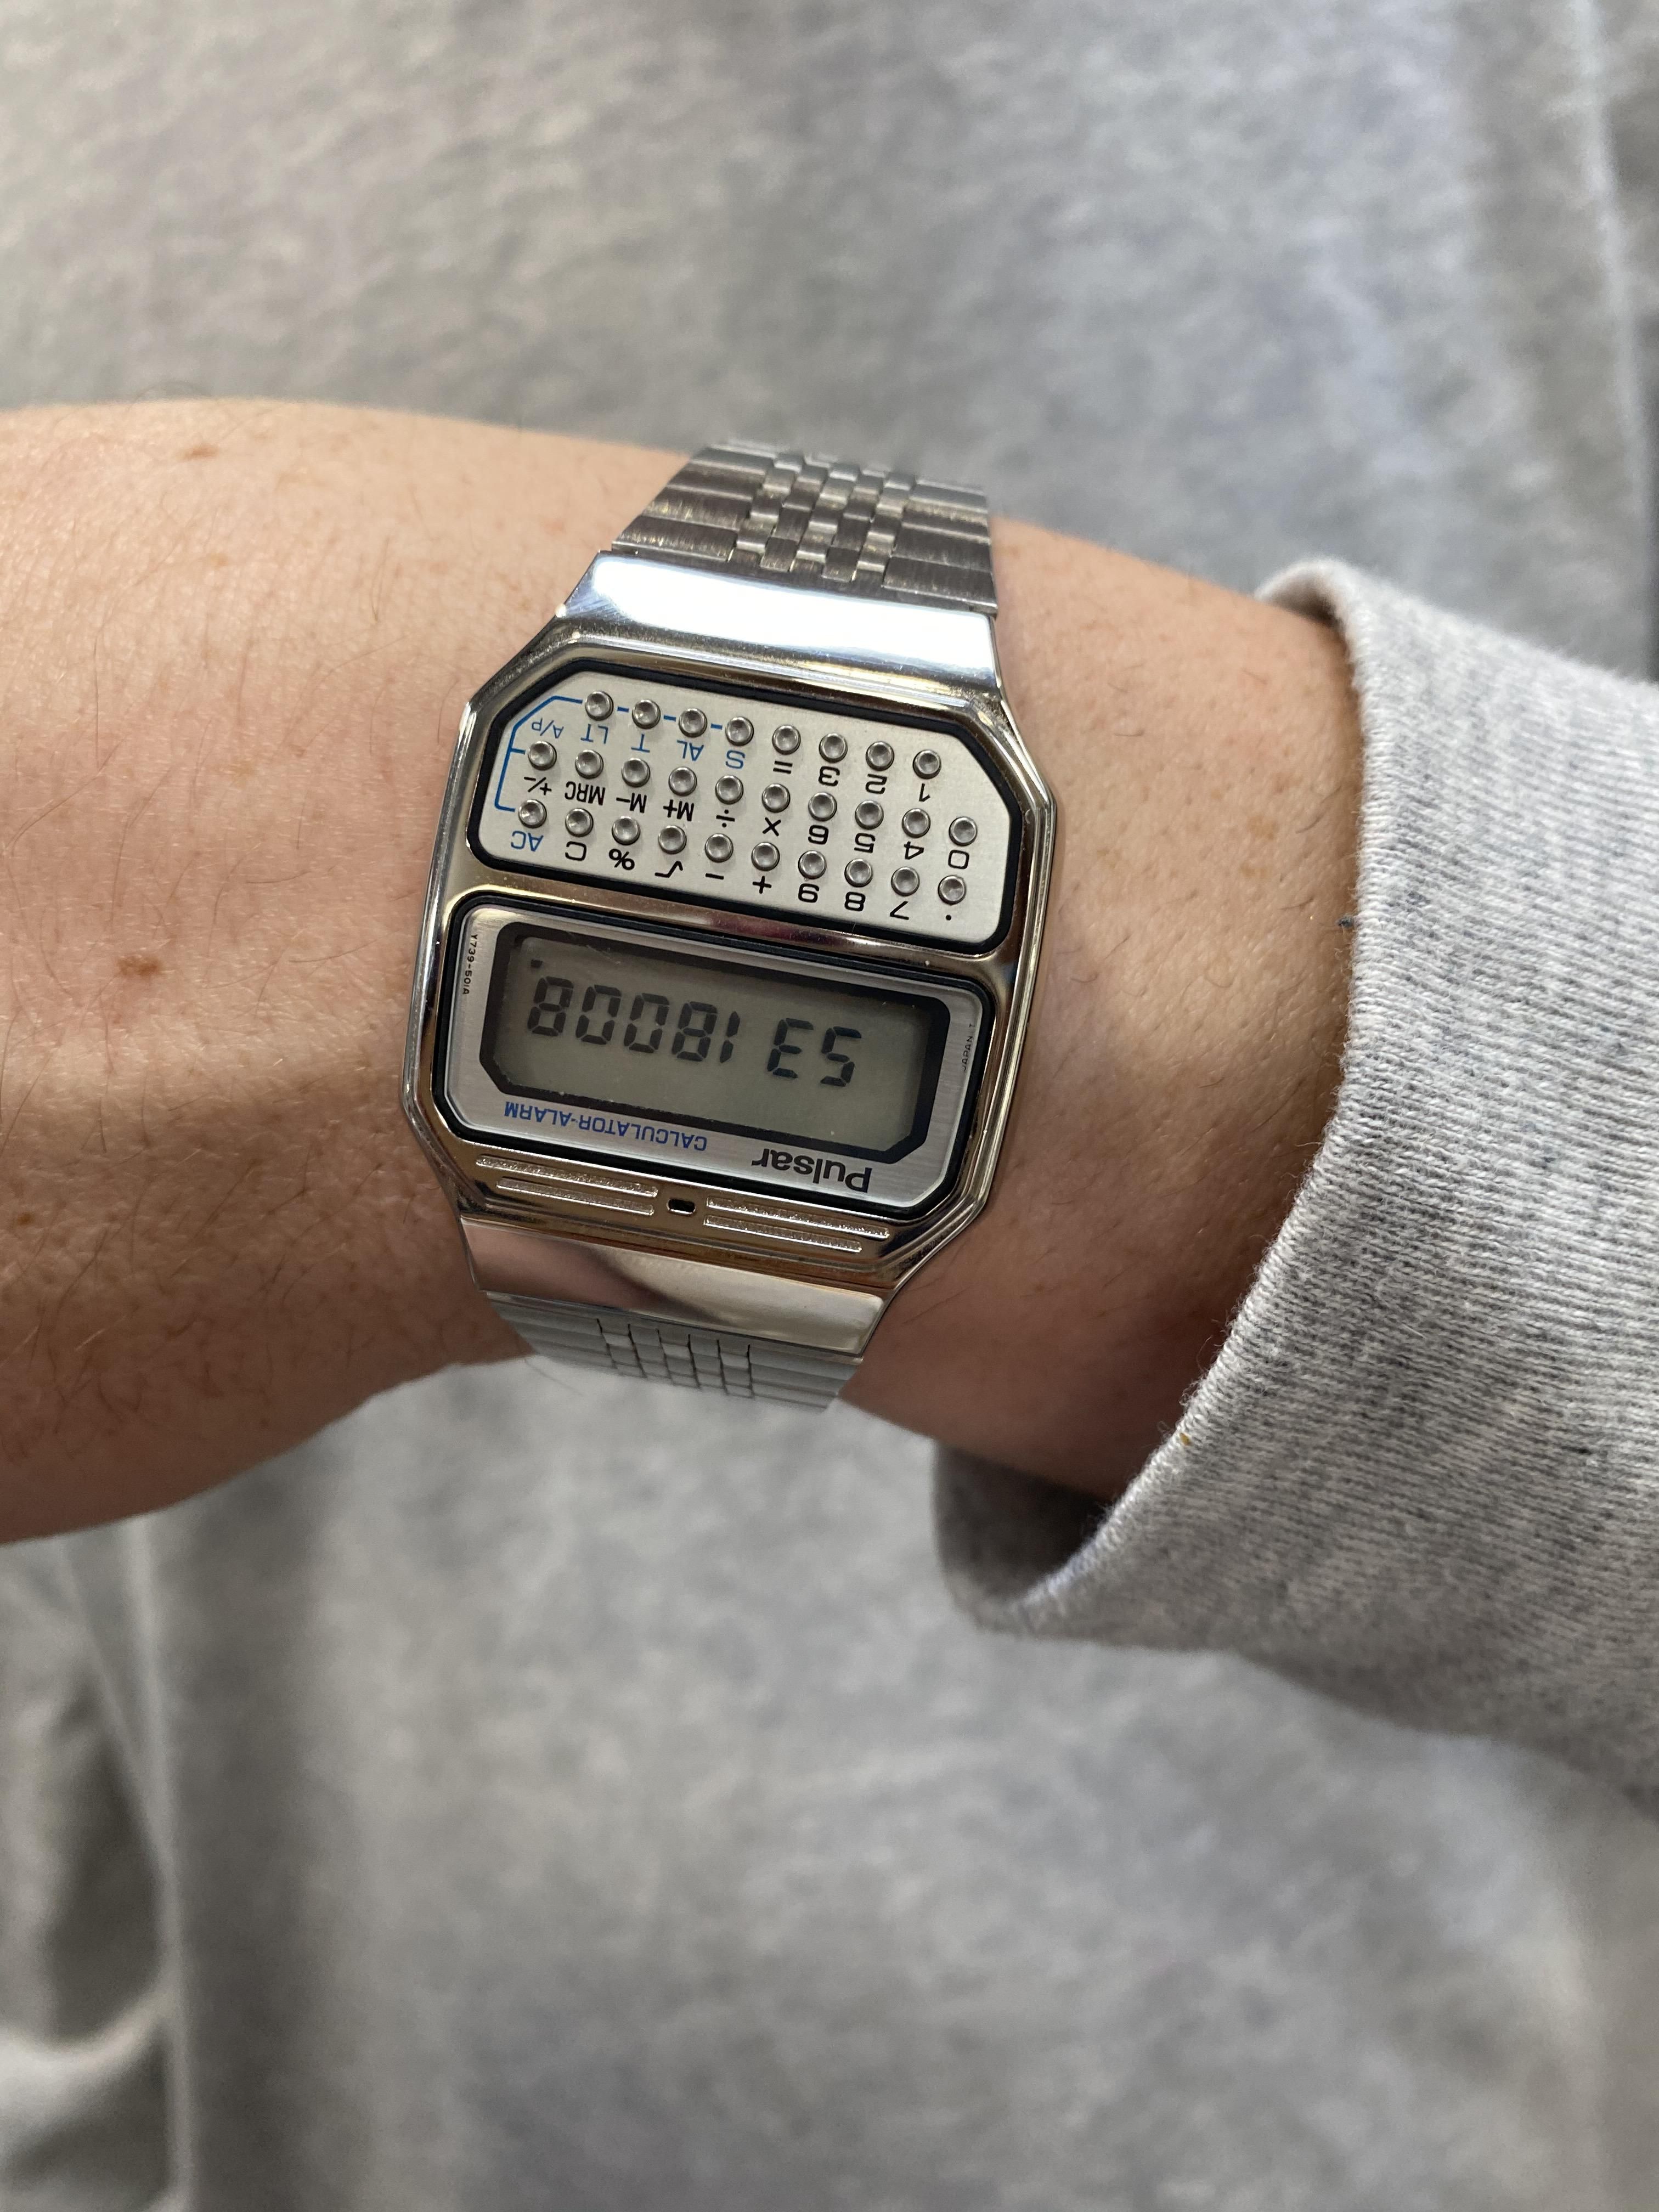 Got my boyfriend this vintage pulsar calculator watch for christmas. Waiting in line at Best Buy and he says he has something to show me.